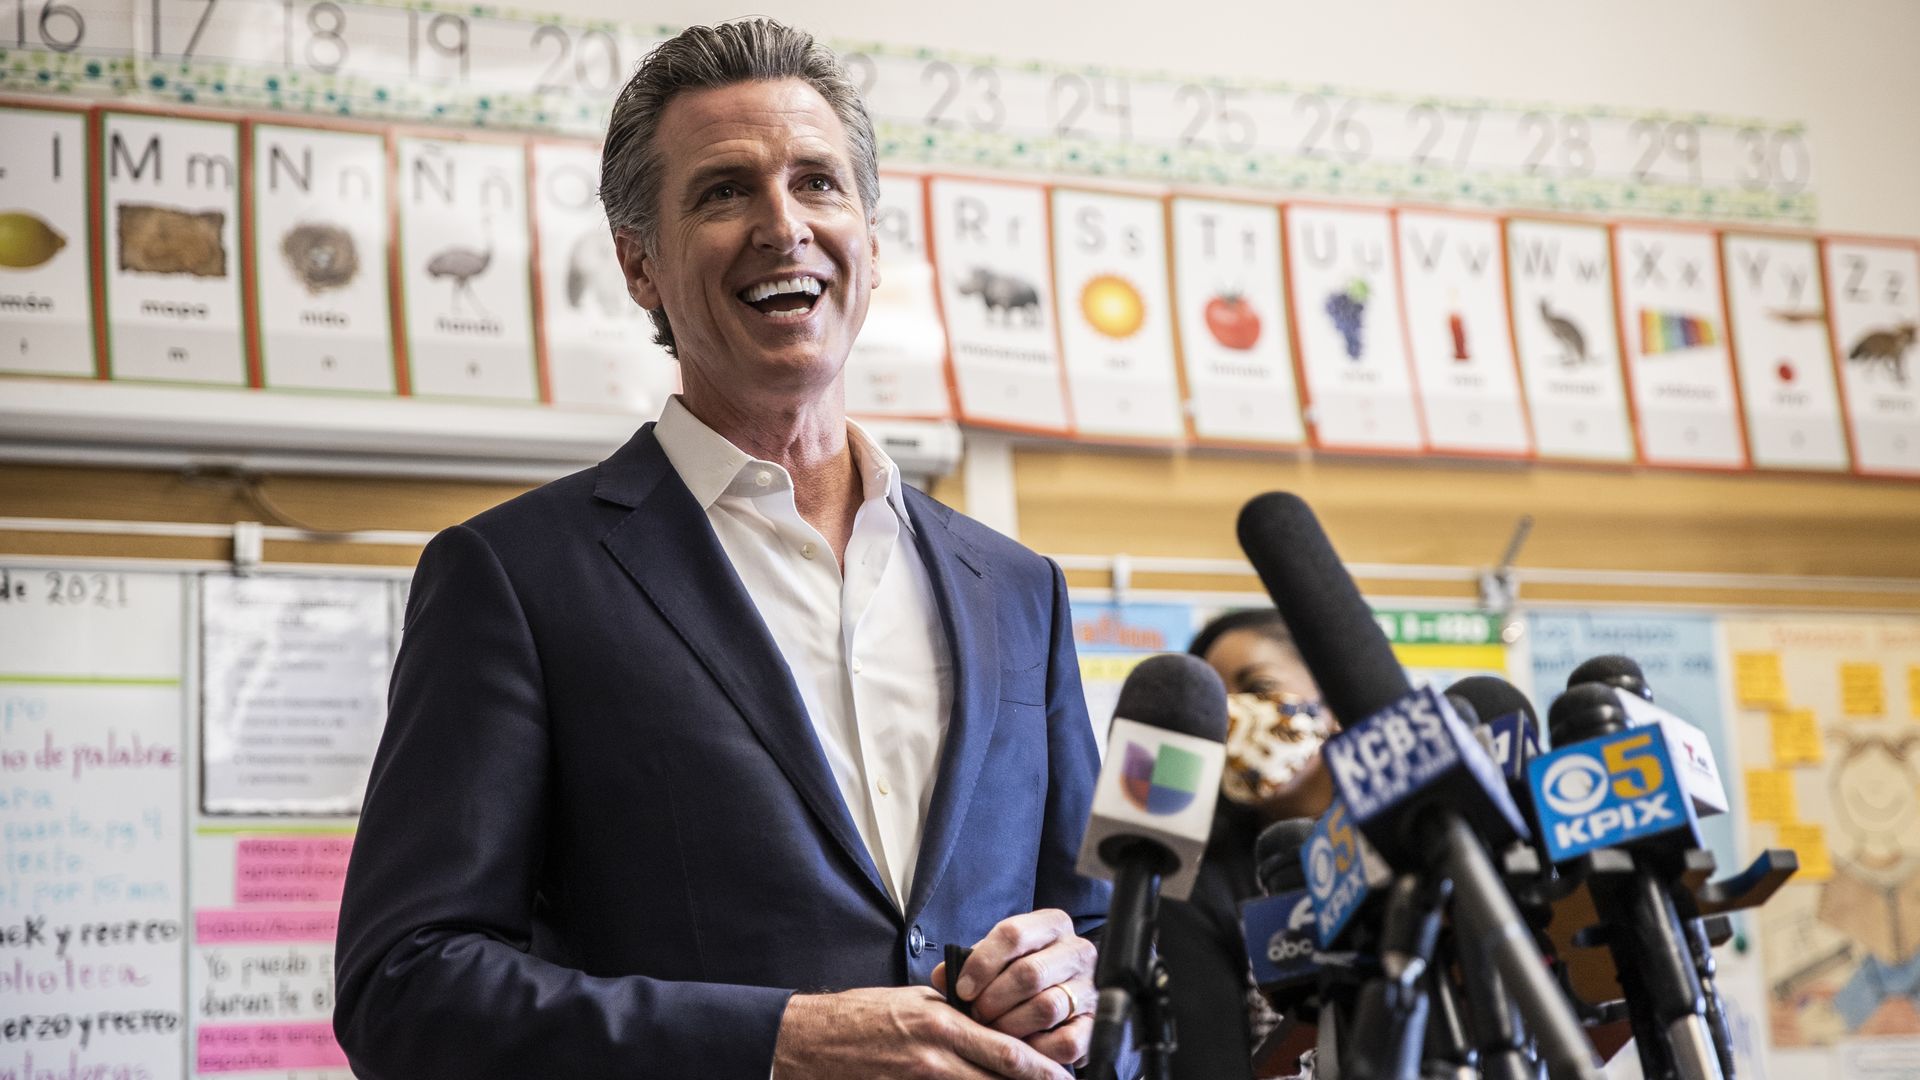 California Gov. Gavin Newsom during a news conference in Oakland, California on Wednesday.